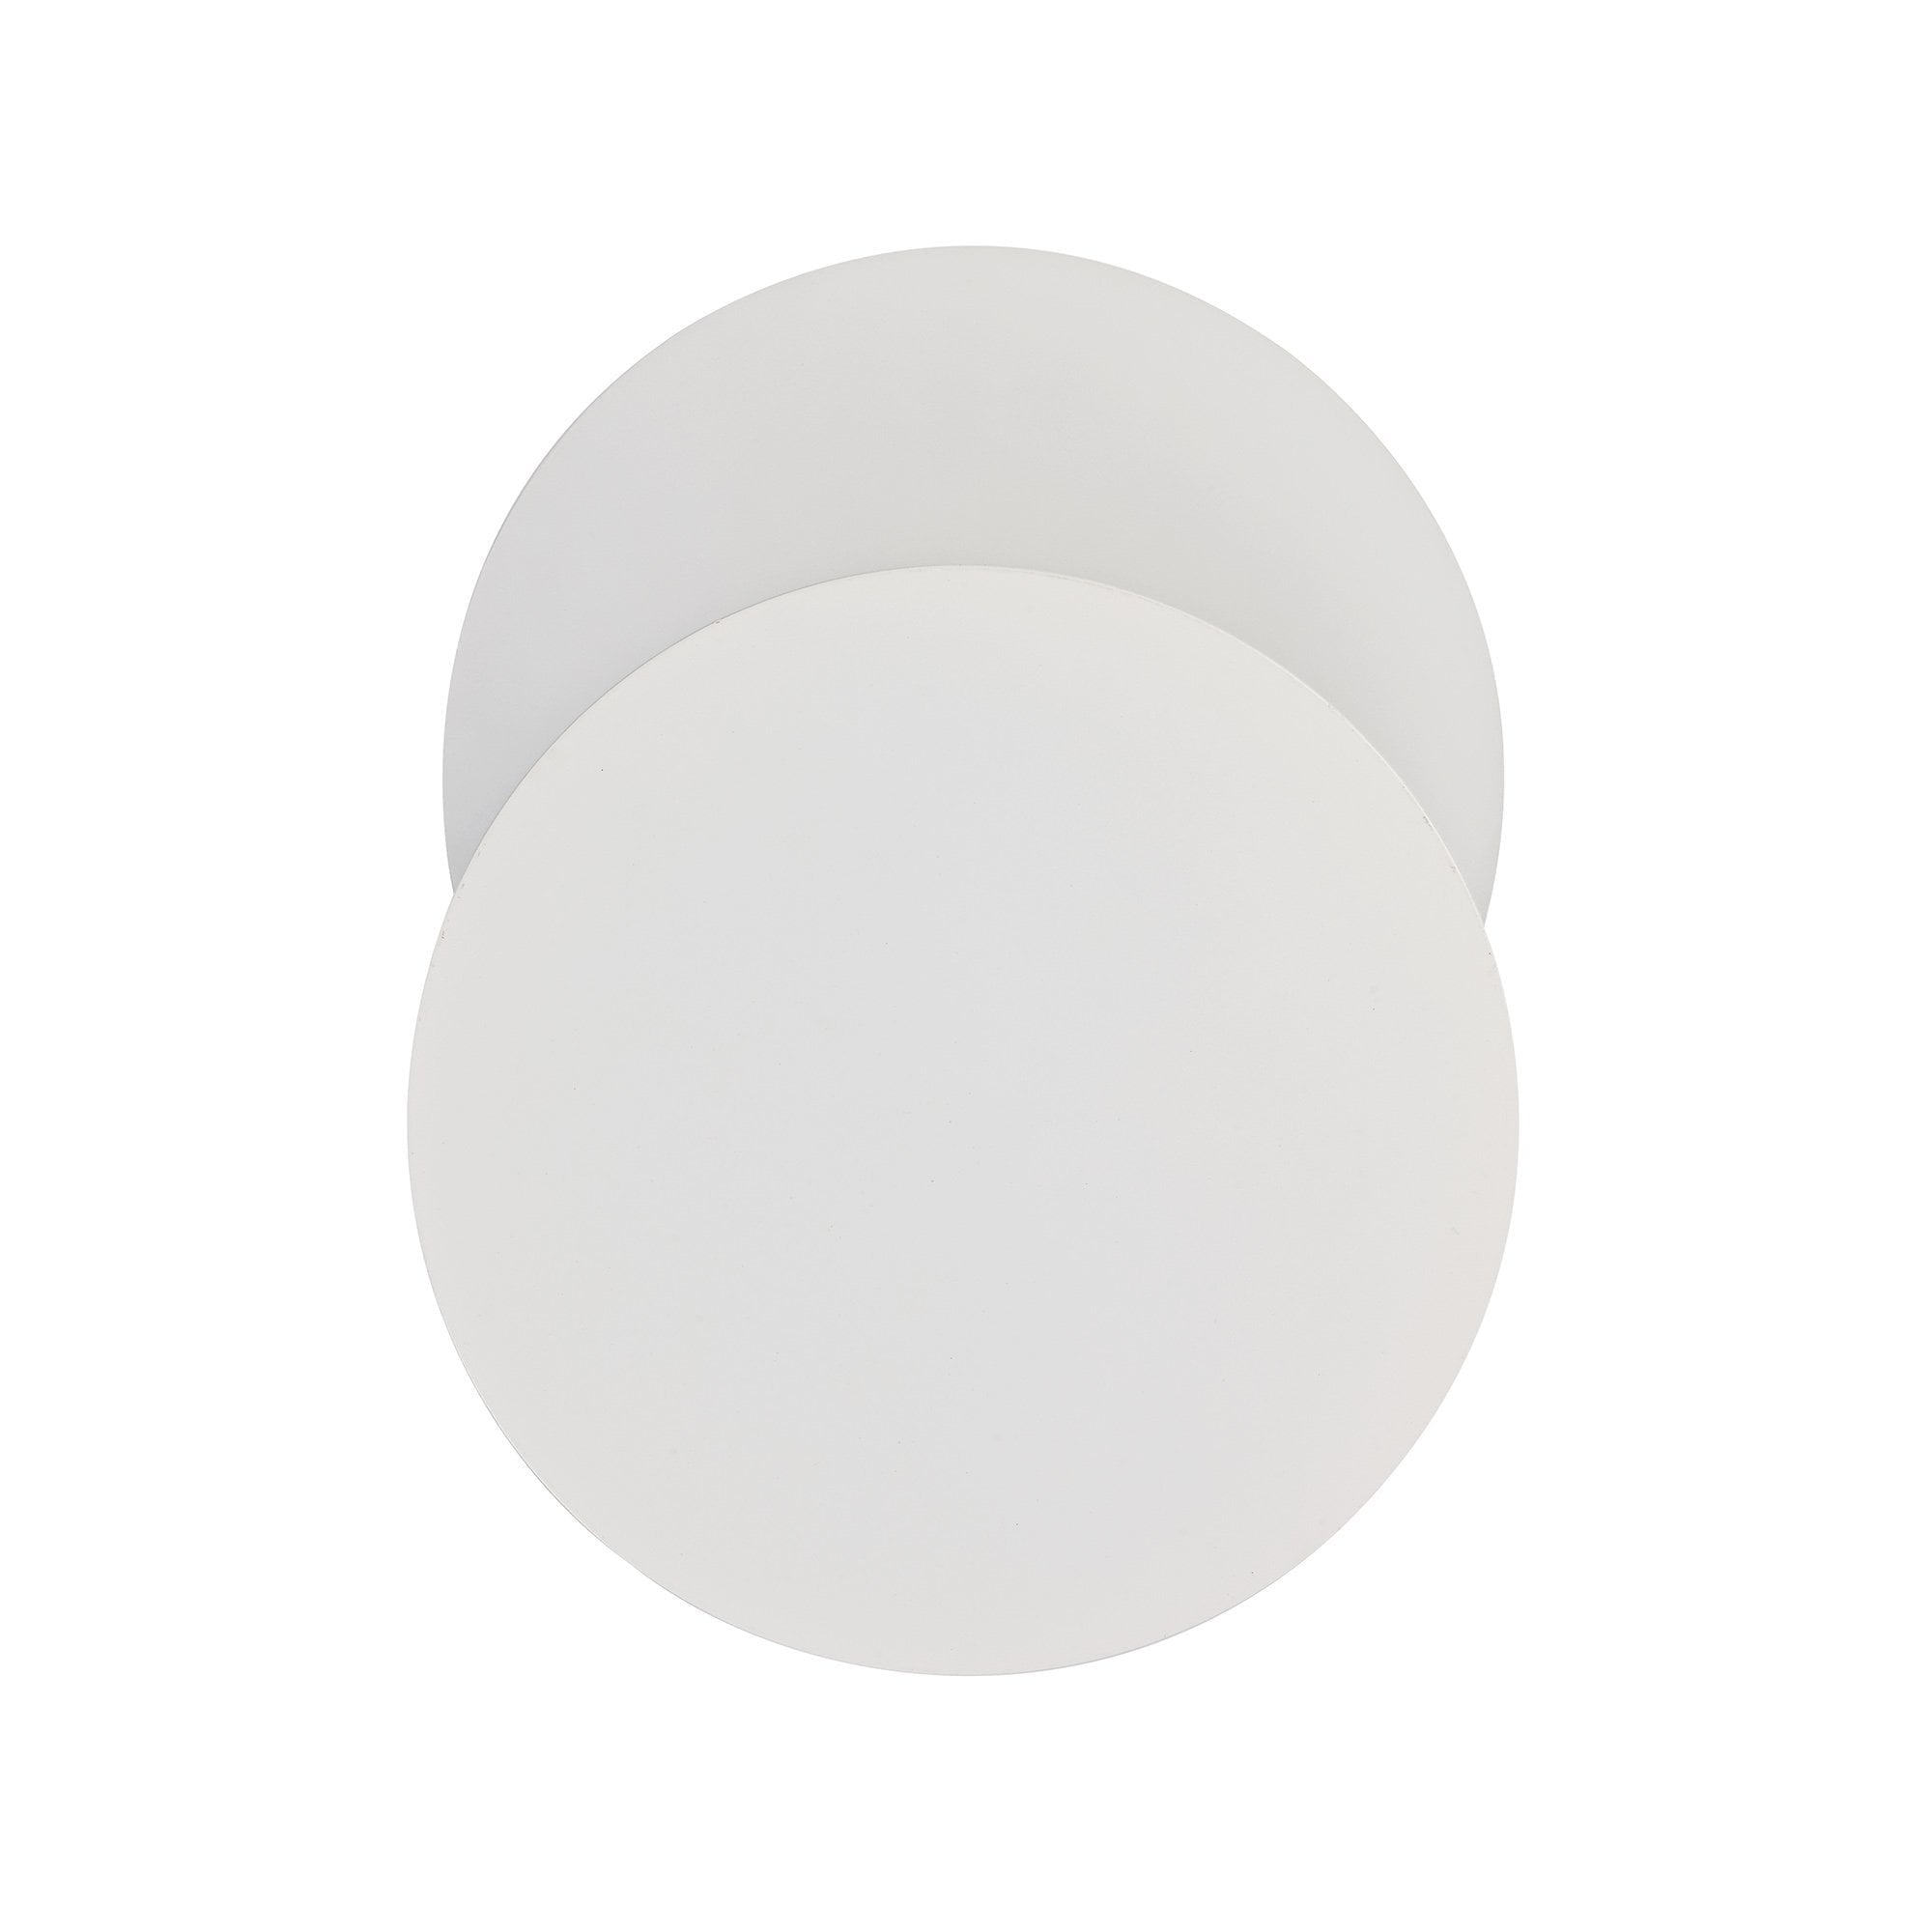 Magnetic Base Wall Lamp, 12W LED 3000K 498lm, 20/19cm Round Bottom Offset, Sand White/Acrylic Frosted Diffuser